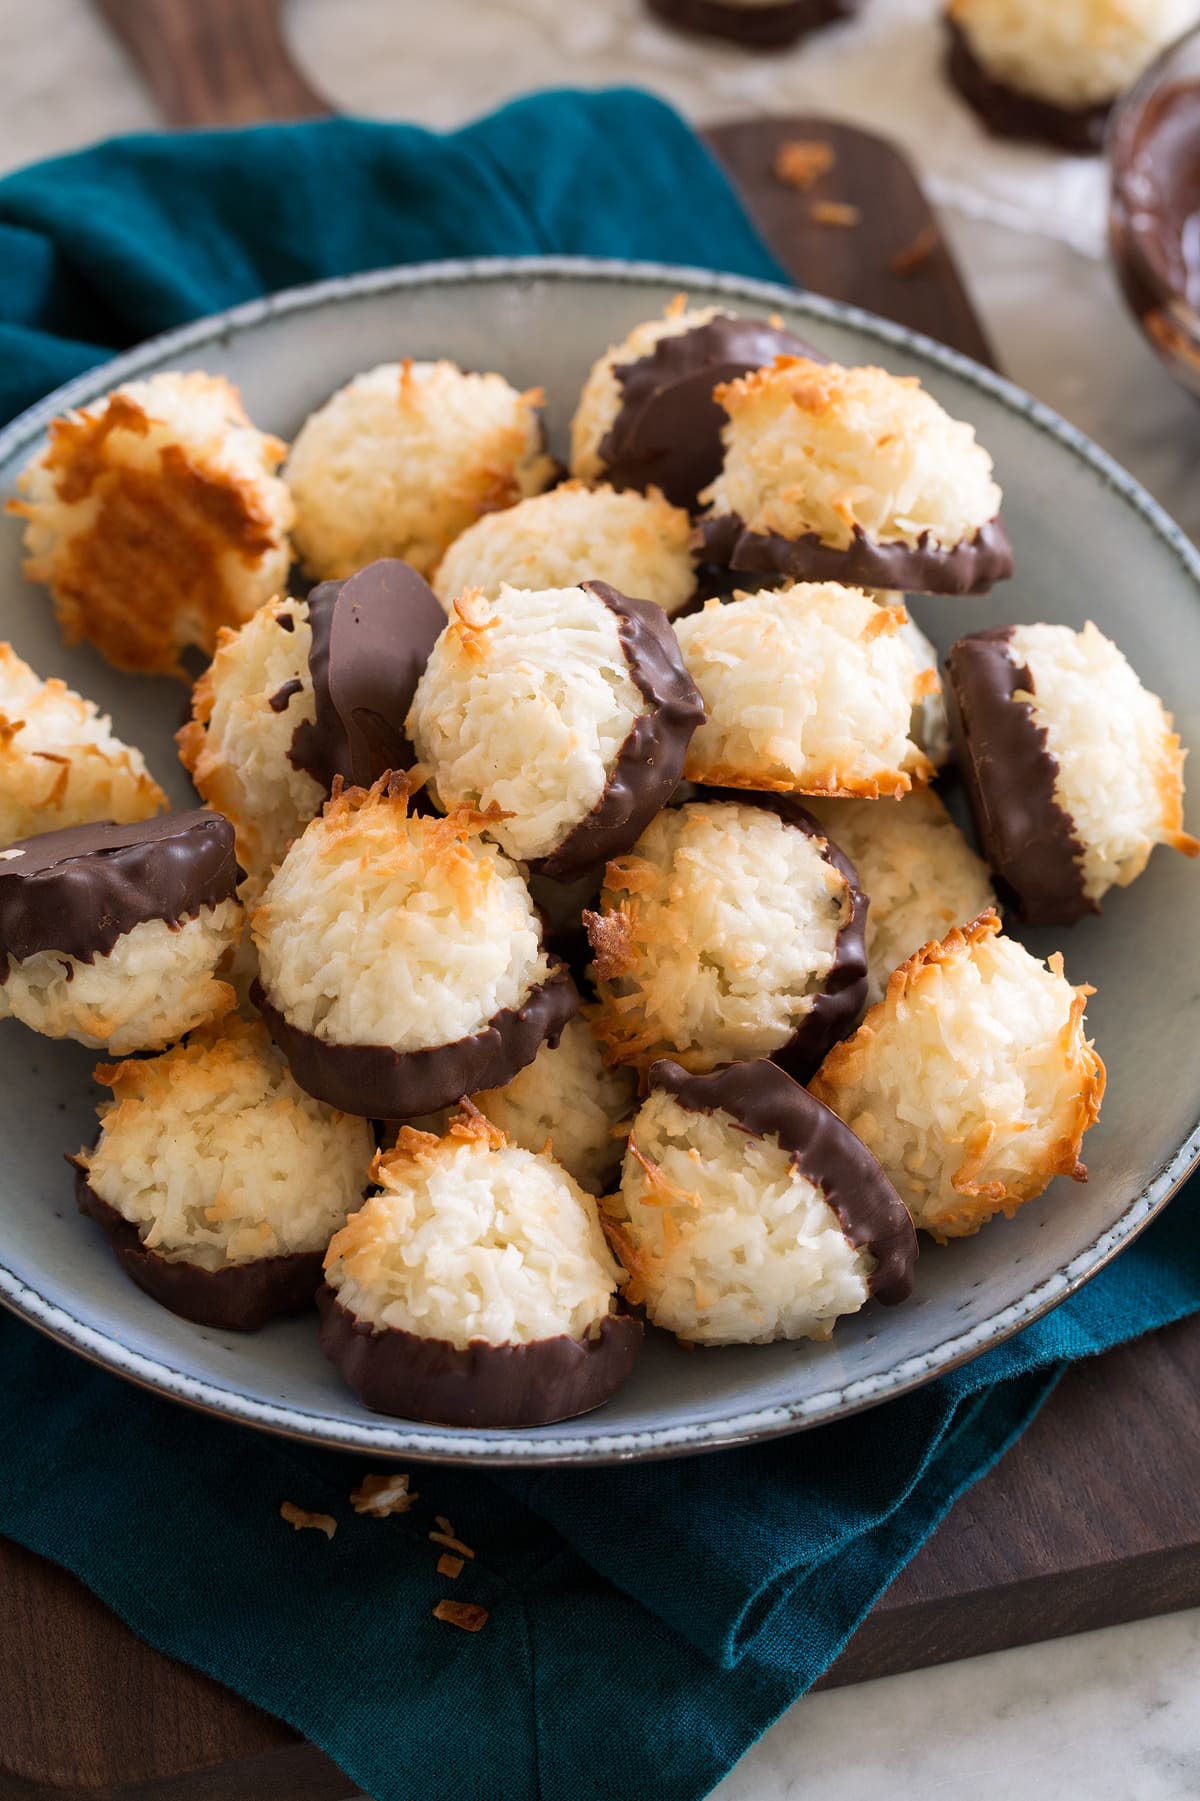 Bowl full of chocolate dipped coconut macaroons.